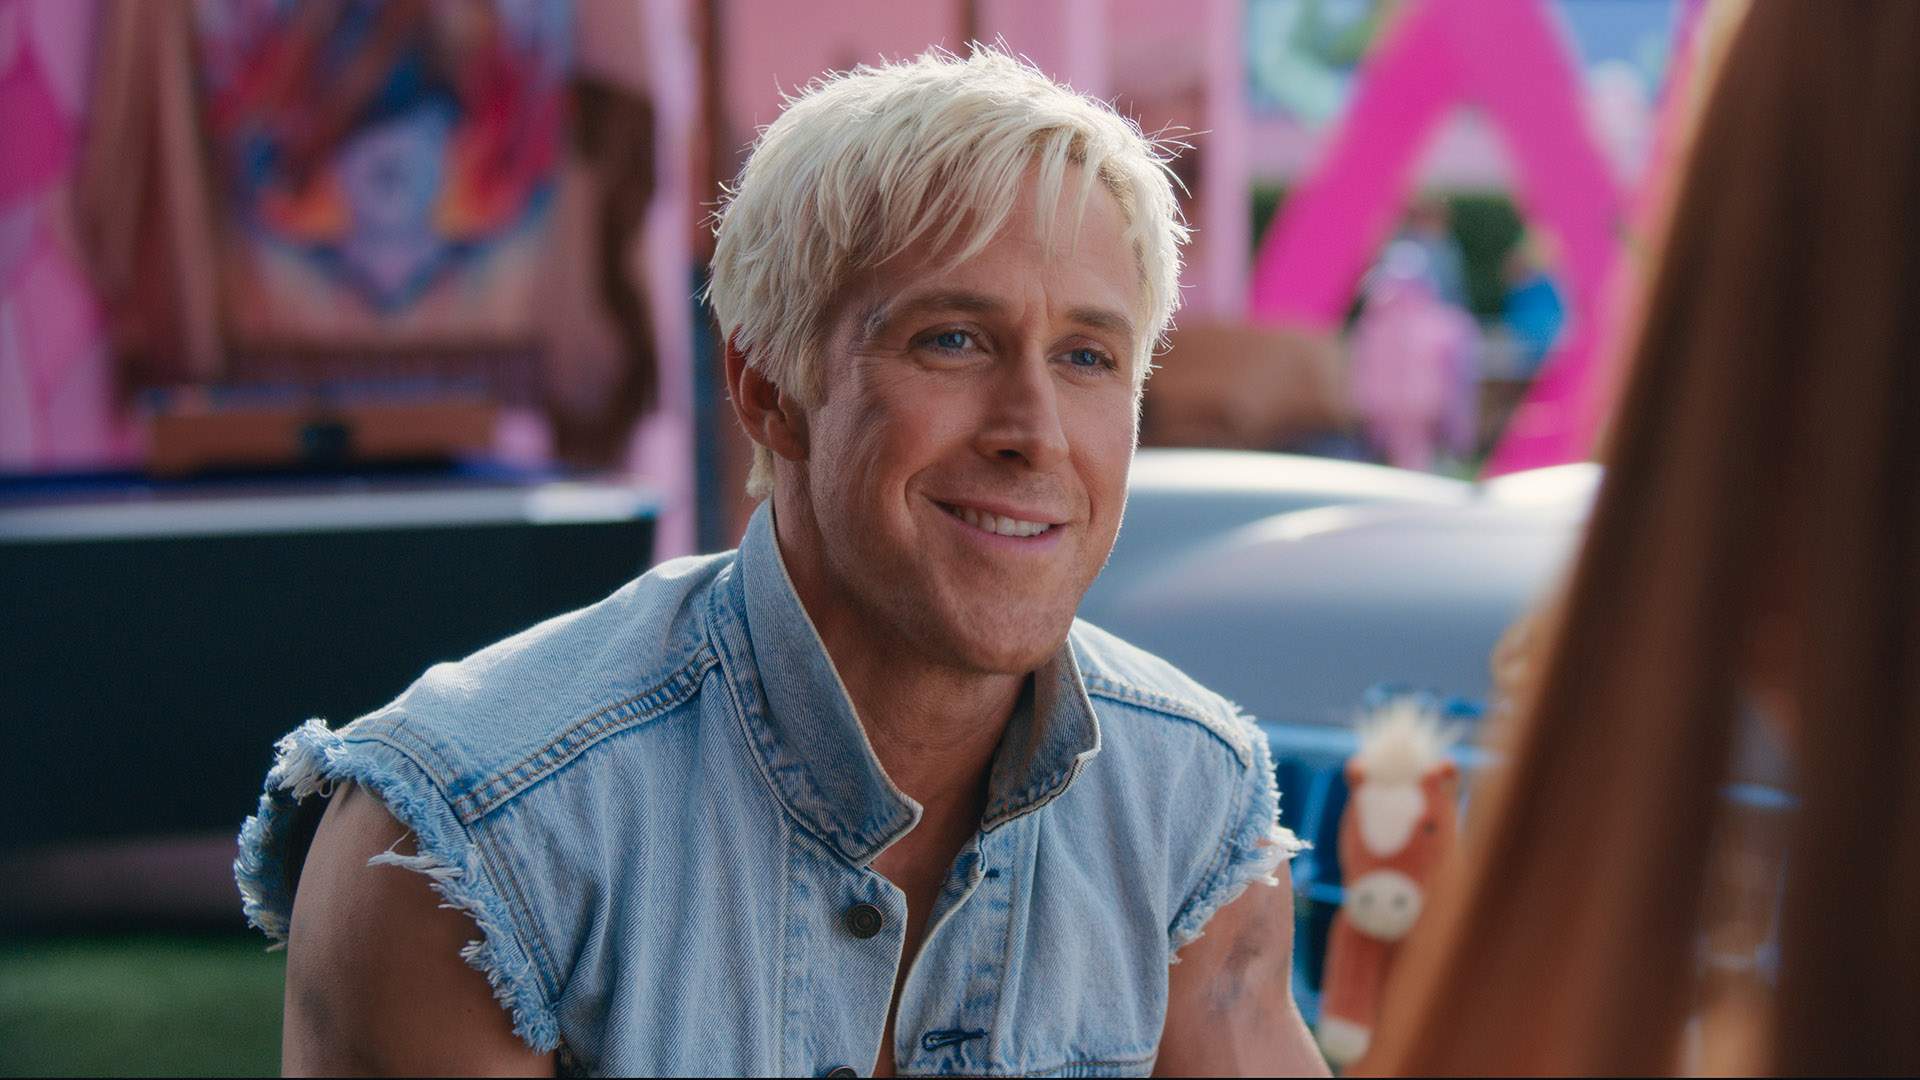 Ryan Gosling Sings About the Struggles of Being Ken in the Latest 'Barbie' Trailer